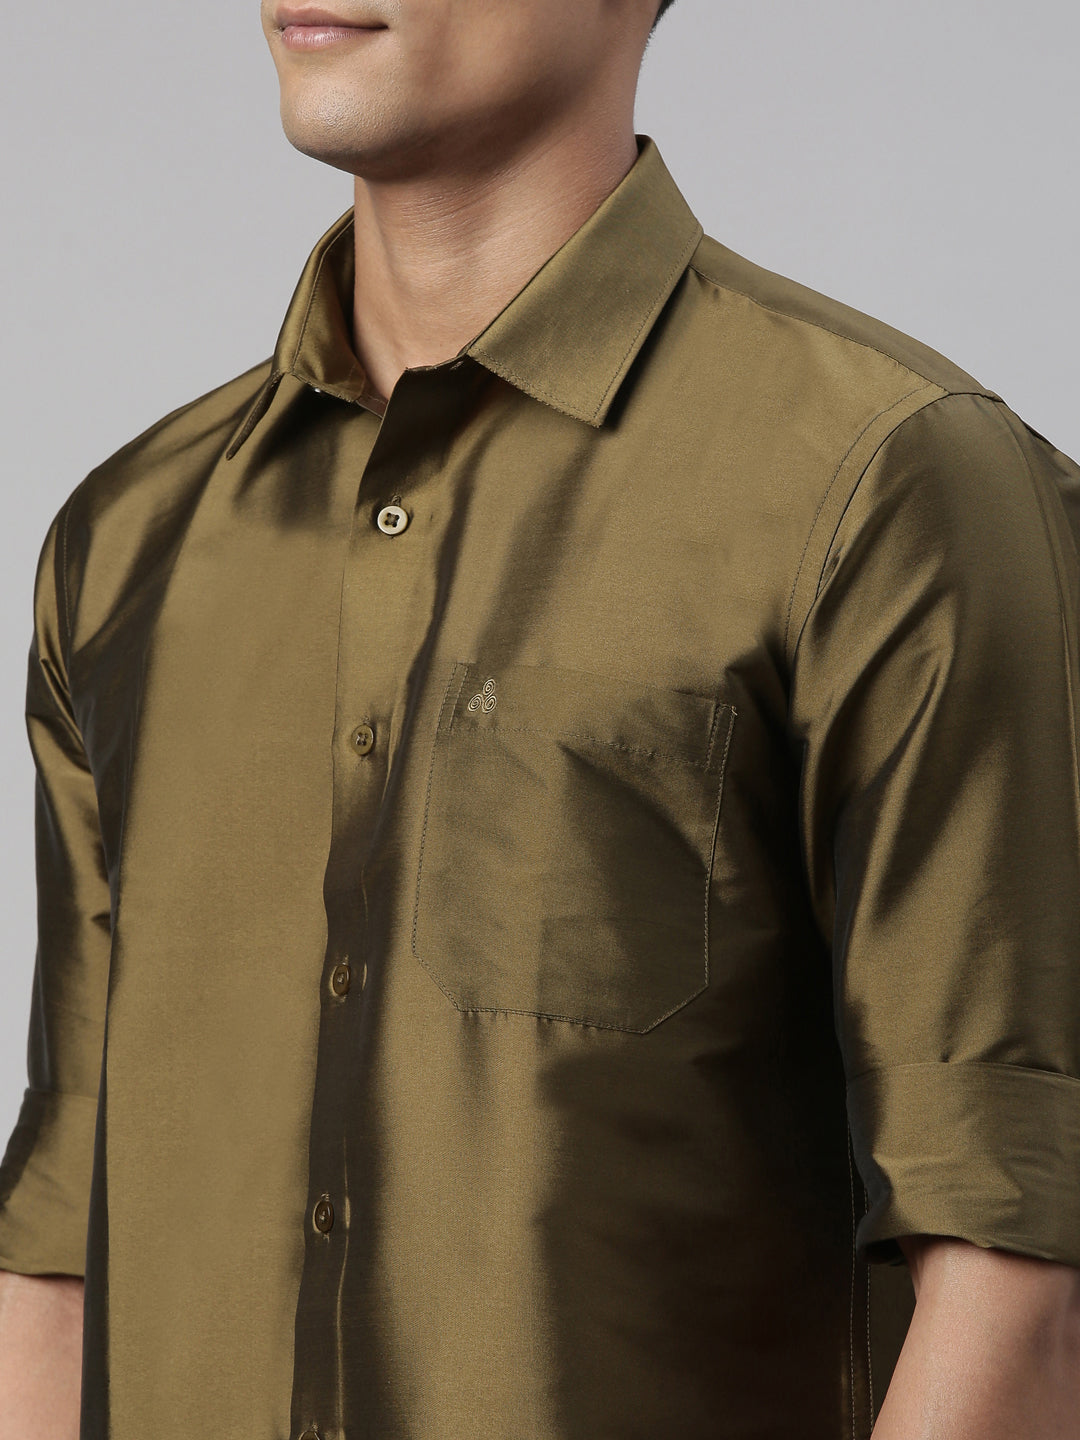 Dark Green Polyester Slim Fit Solid Party Shirt